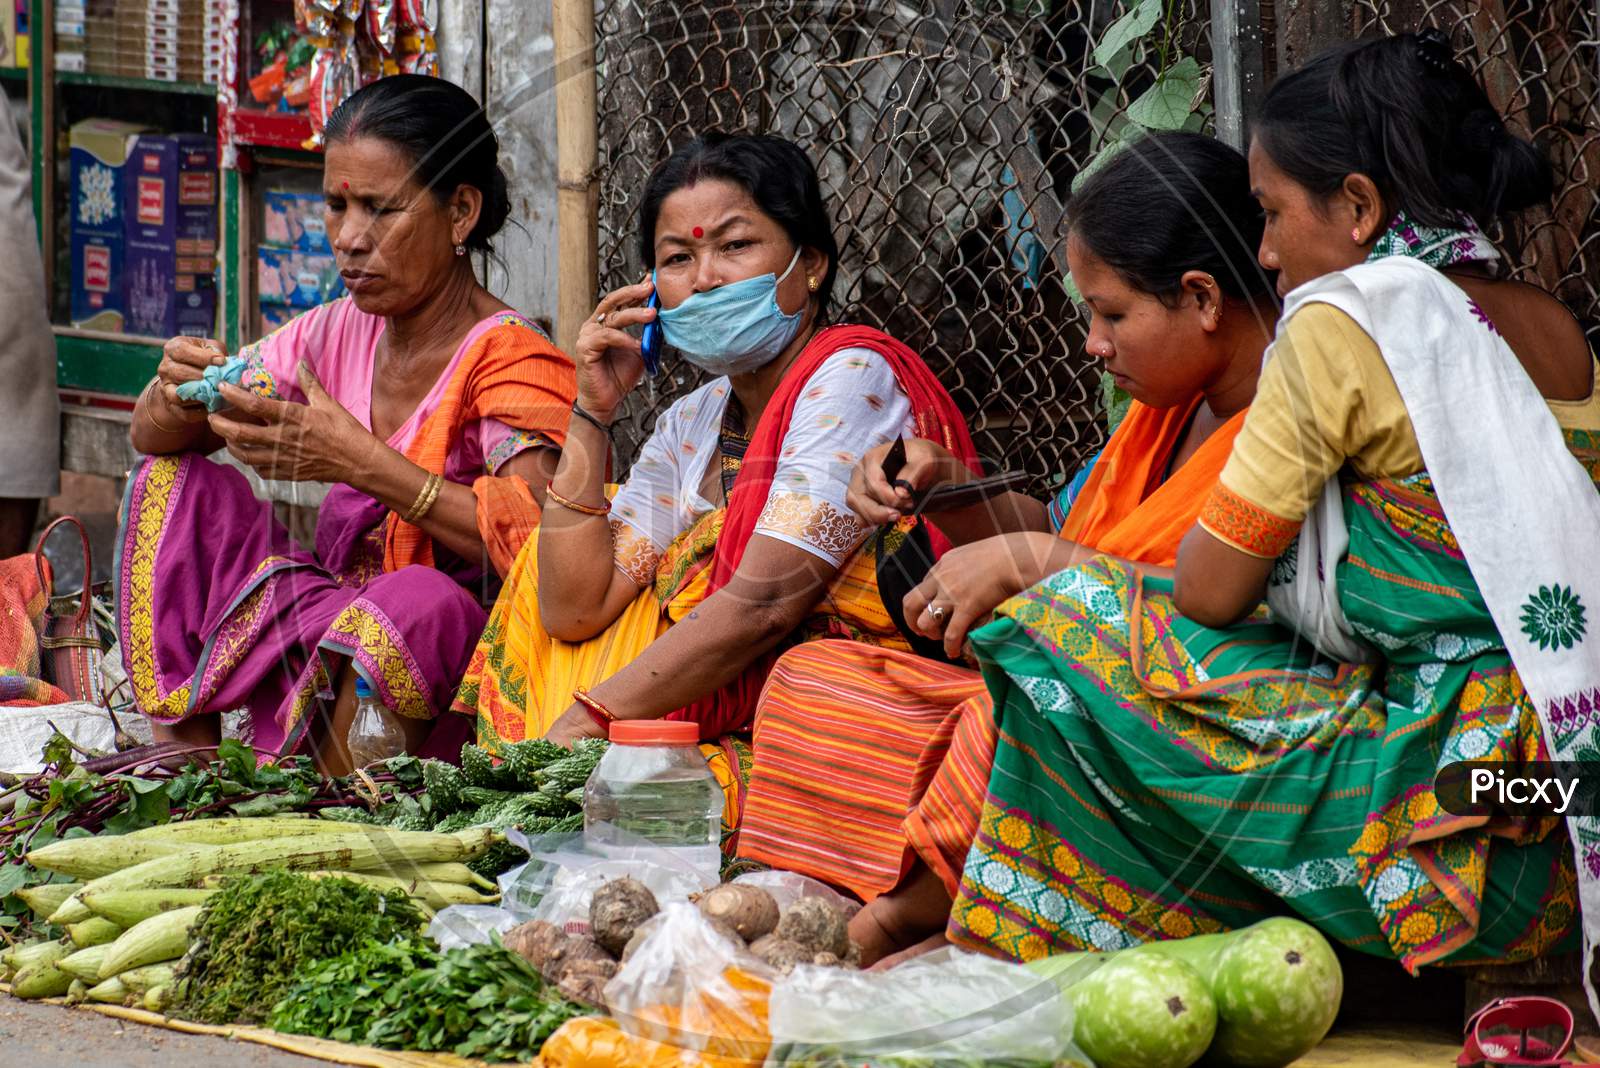 An unidentified woman vendor selling vegetables in weekly market